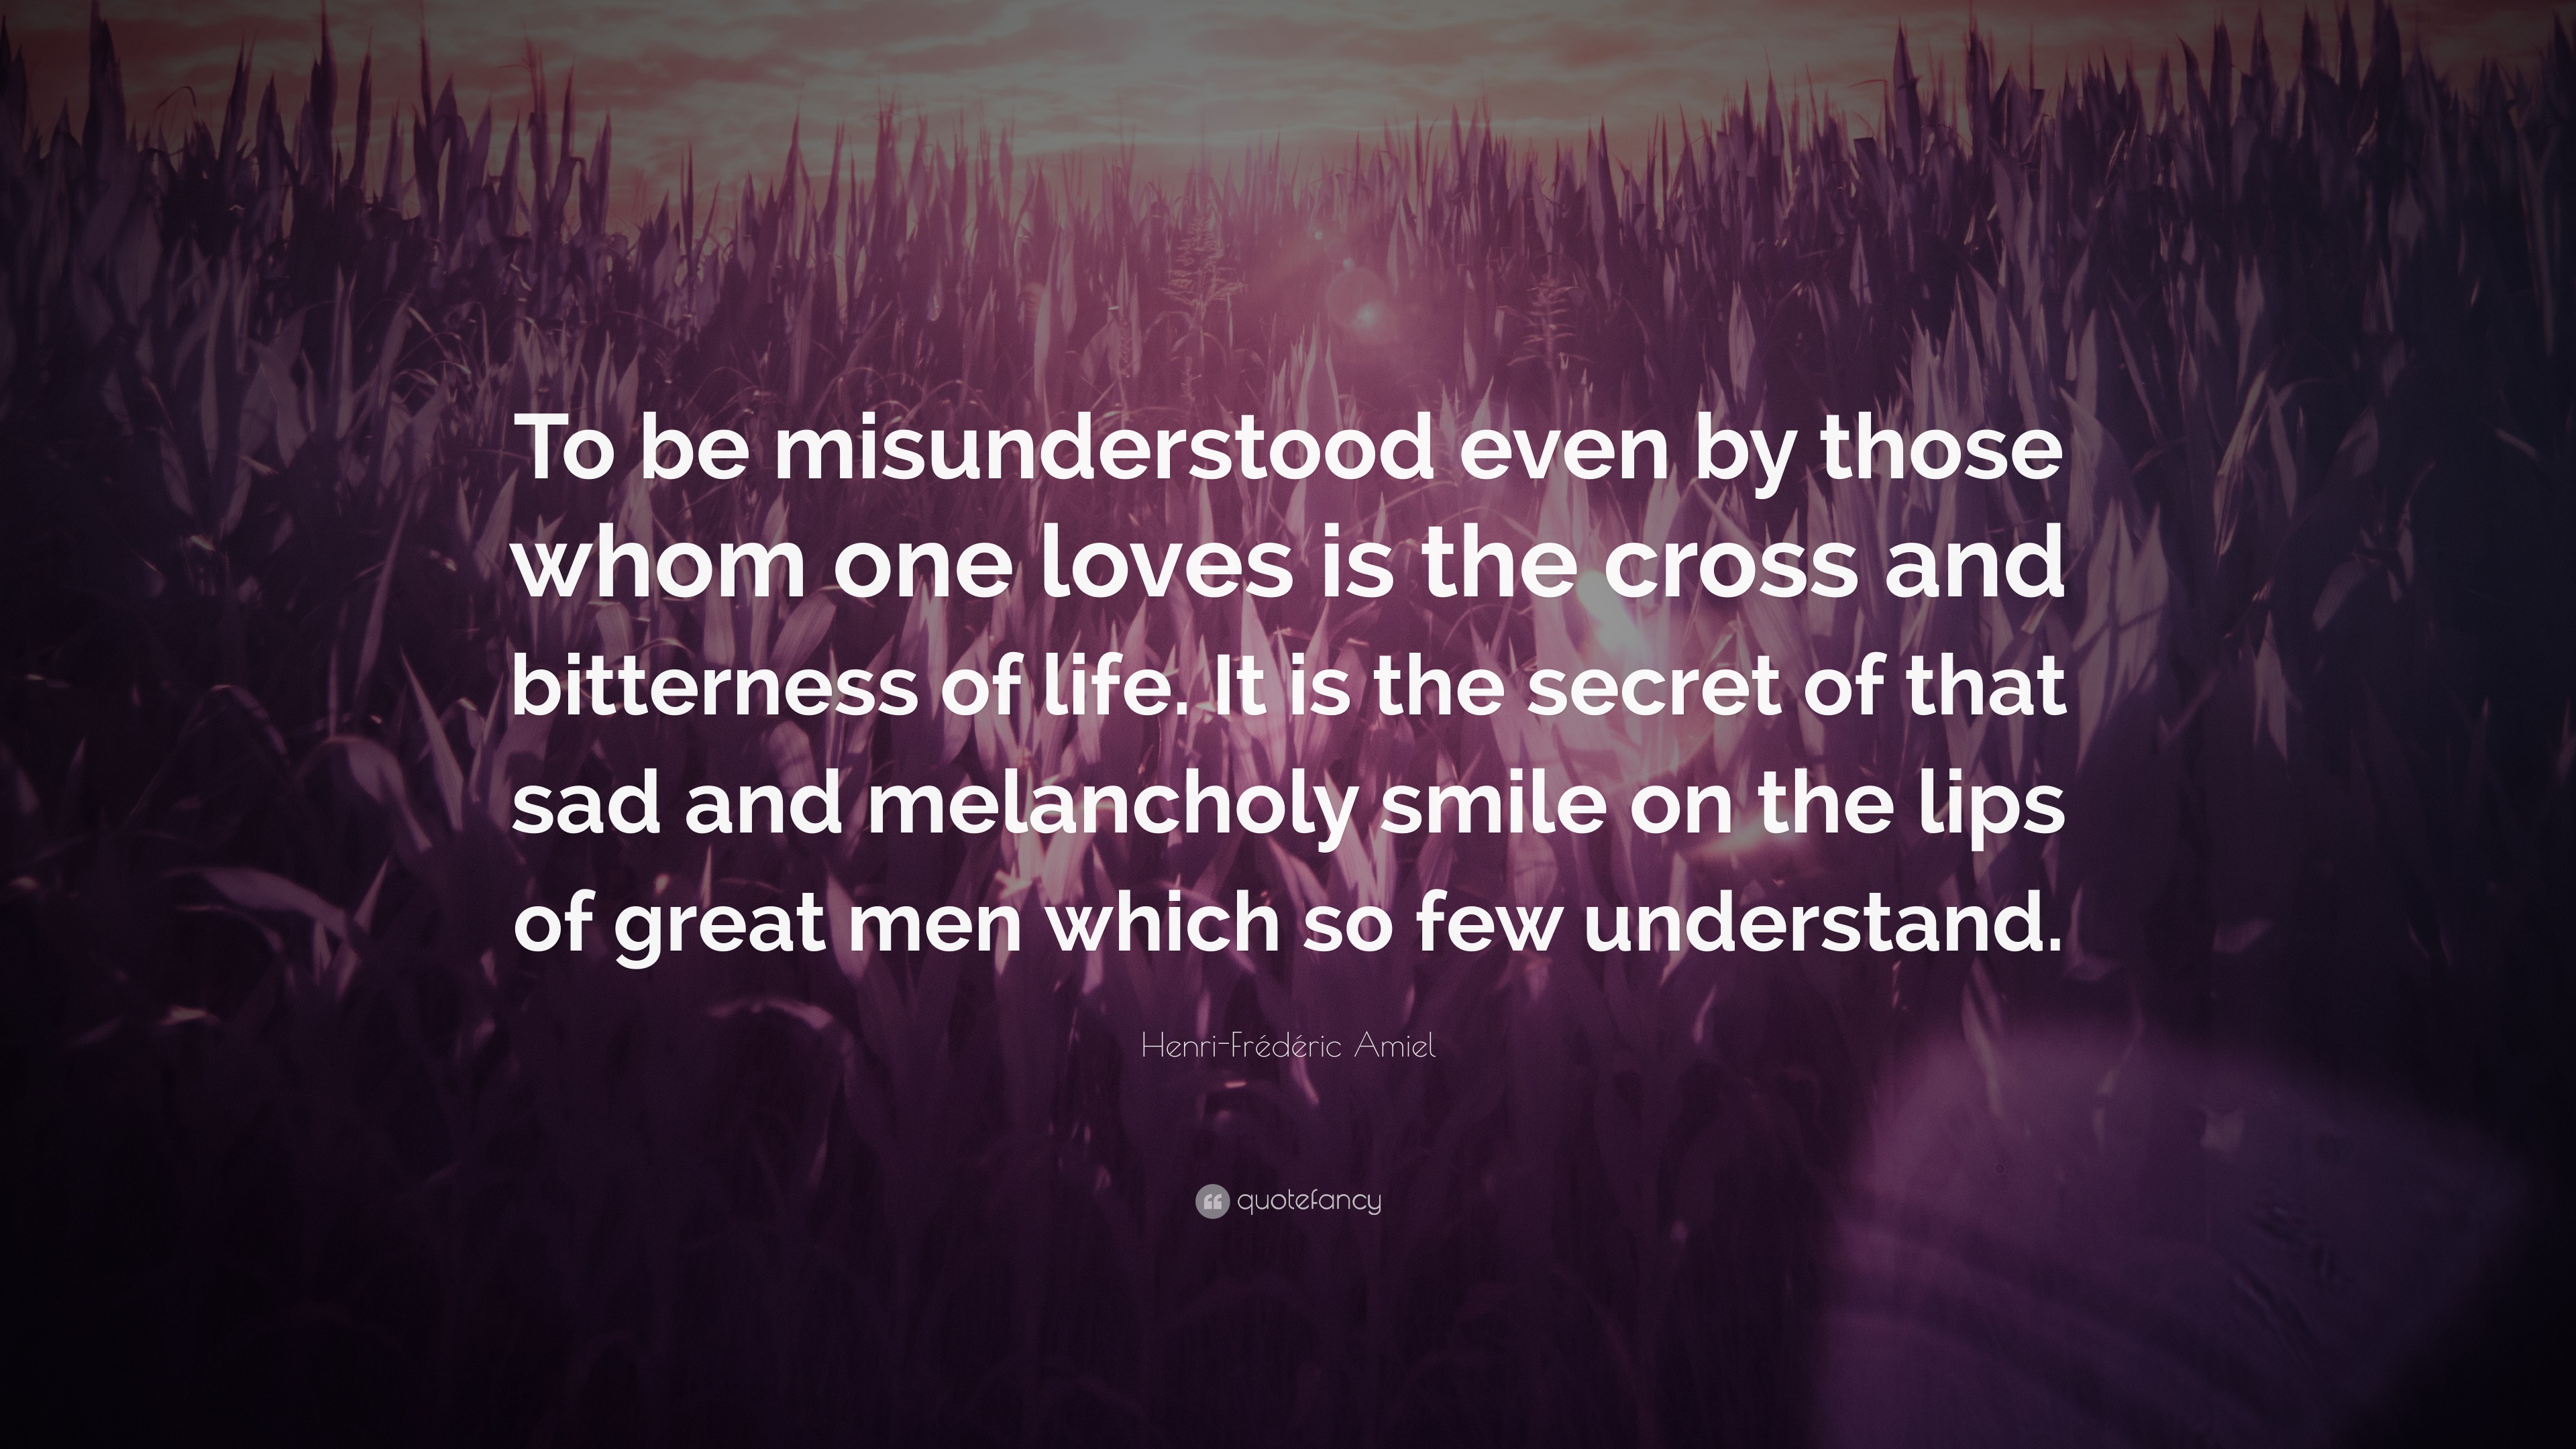 Henri-Frédéric Amiel Quote: “To be misunderstood even by those whom one ...